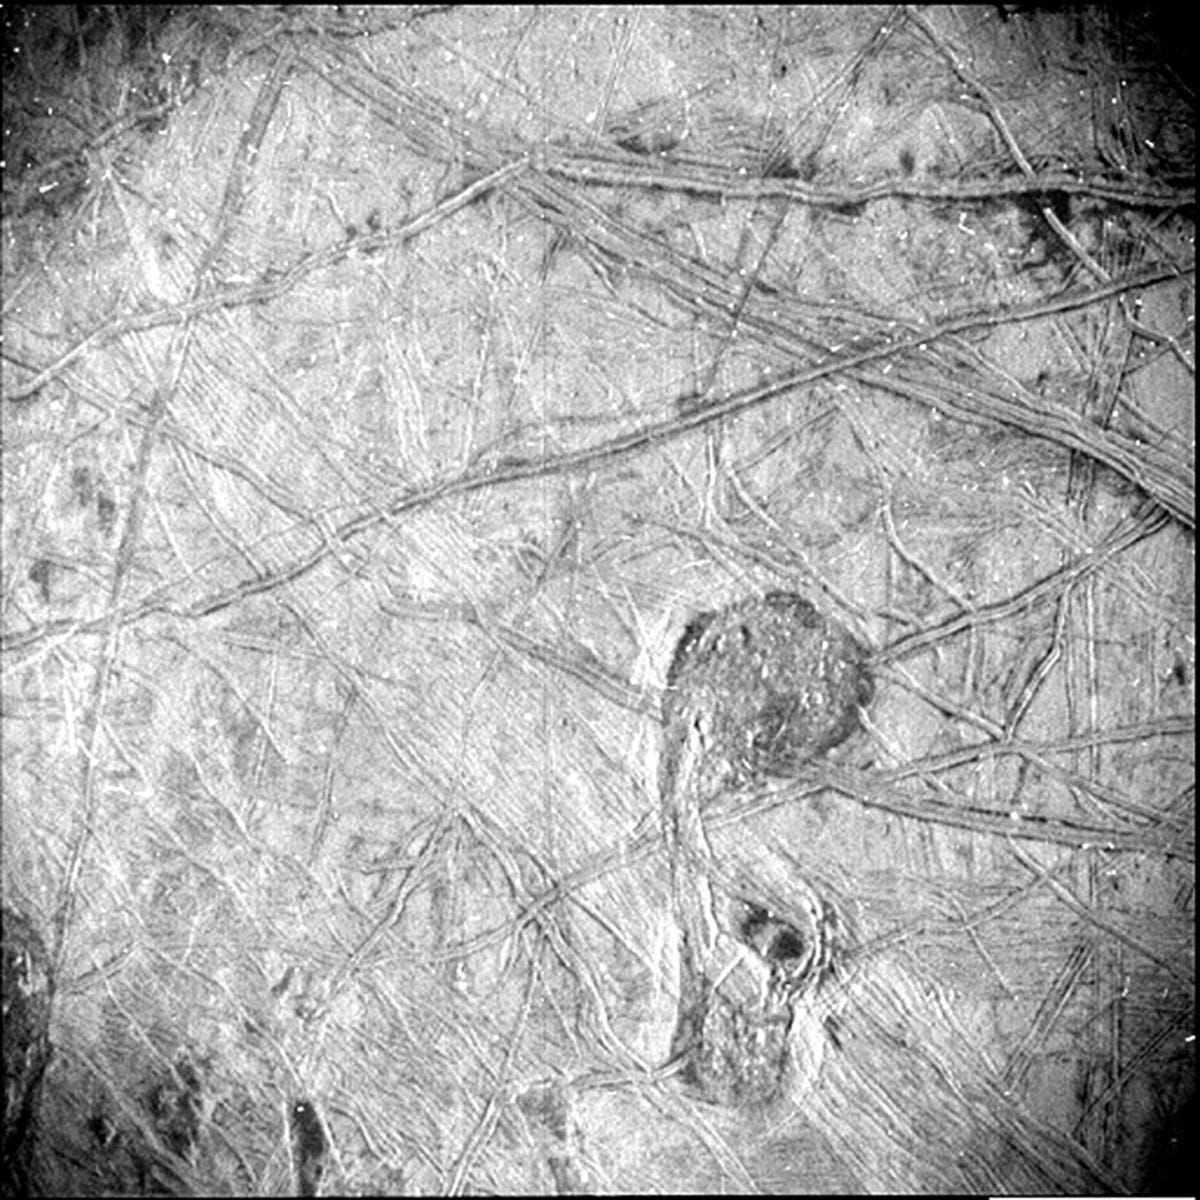 Odd-looking, striated icy crust Jupiter moon Europa with criss-crossing lines in black and white.